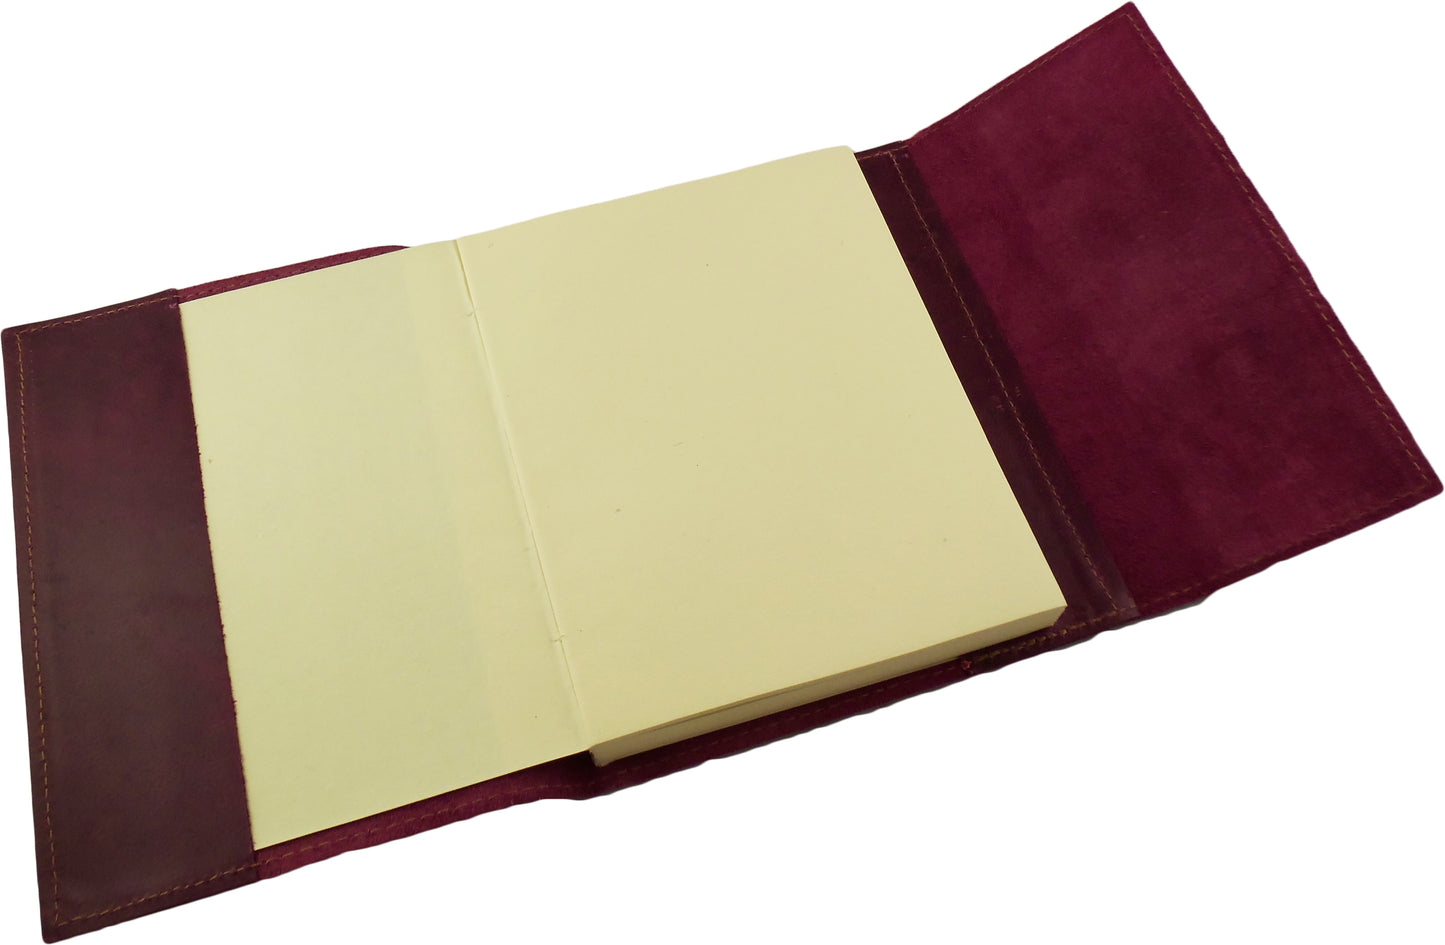 Colorful Leather Refillable Travel Journal Sketchbook with Handmade Paper - 200 pages - 6 x 8" *NEW* - Rustic Ridge Leather